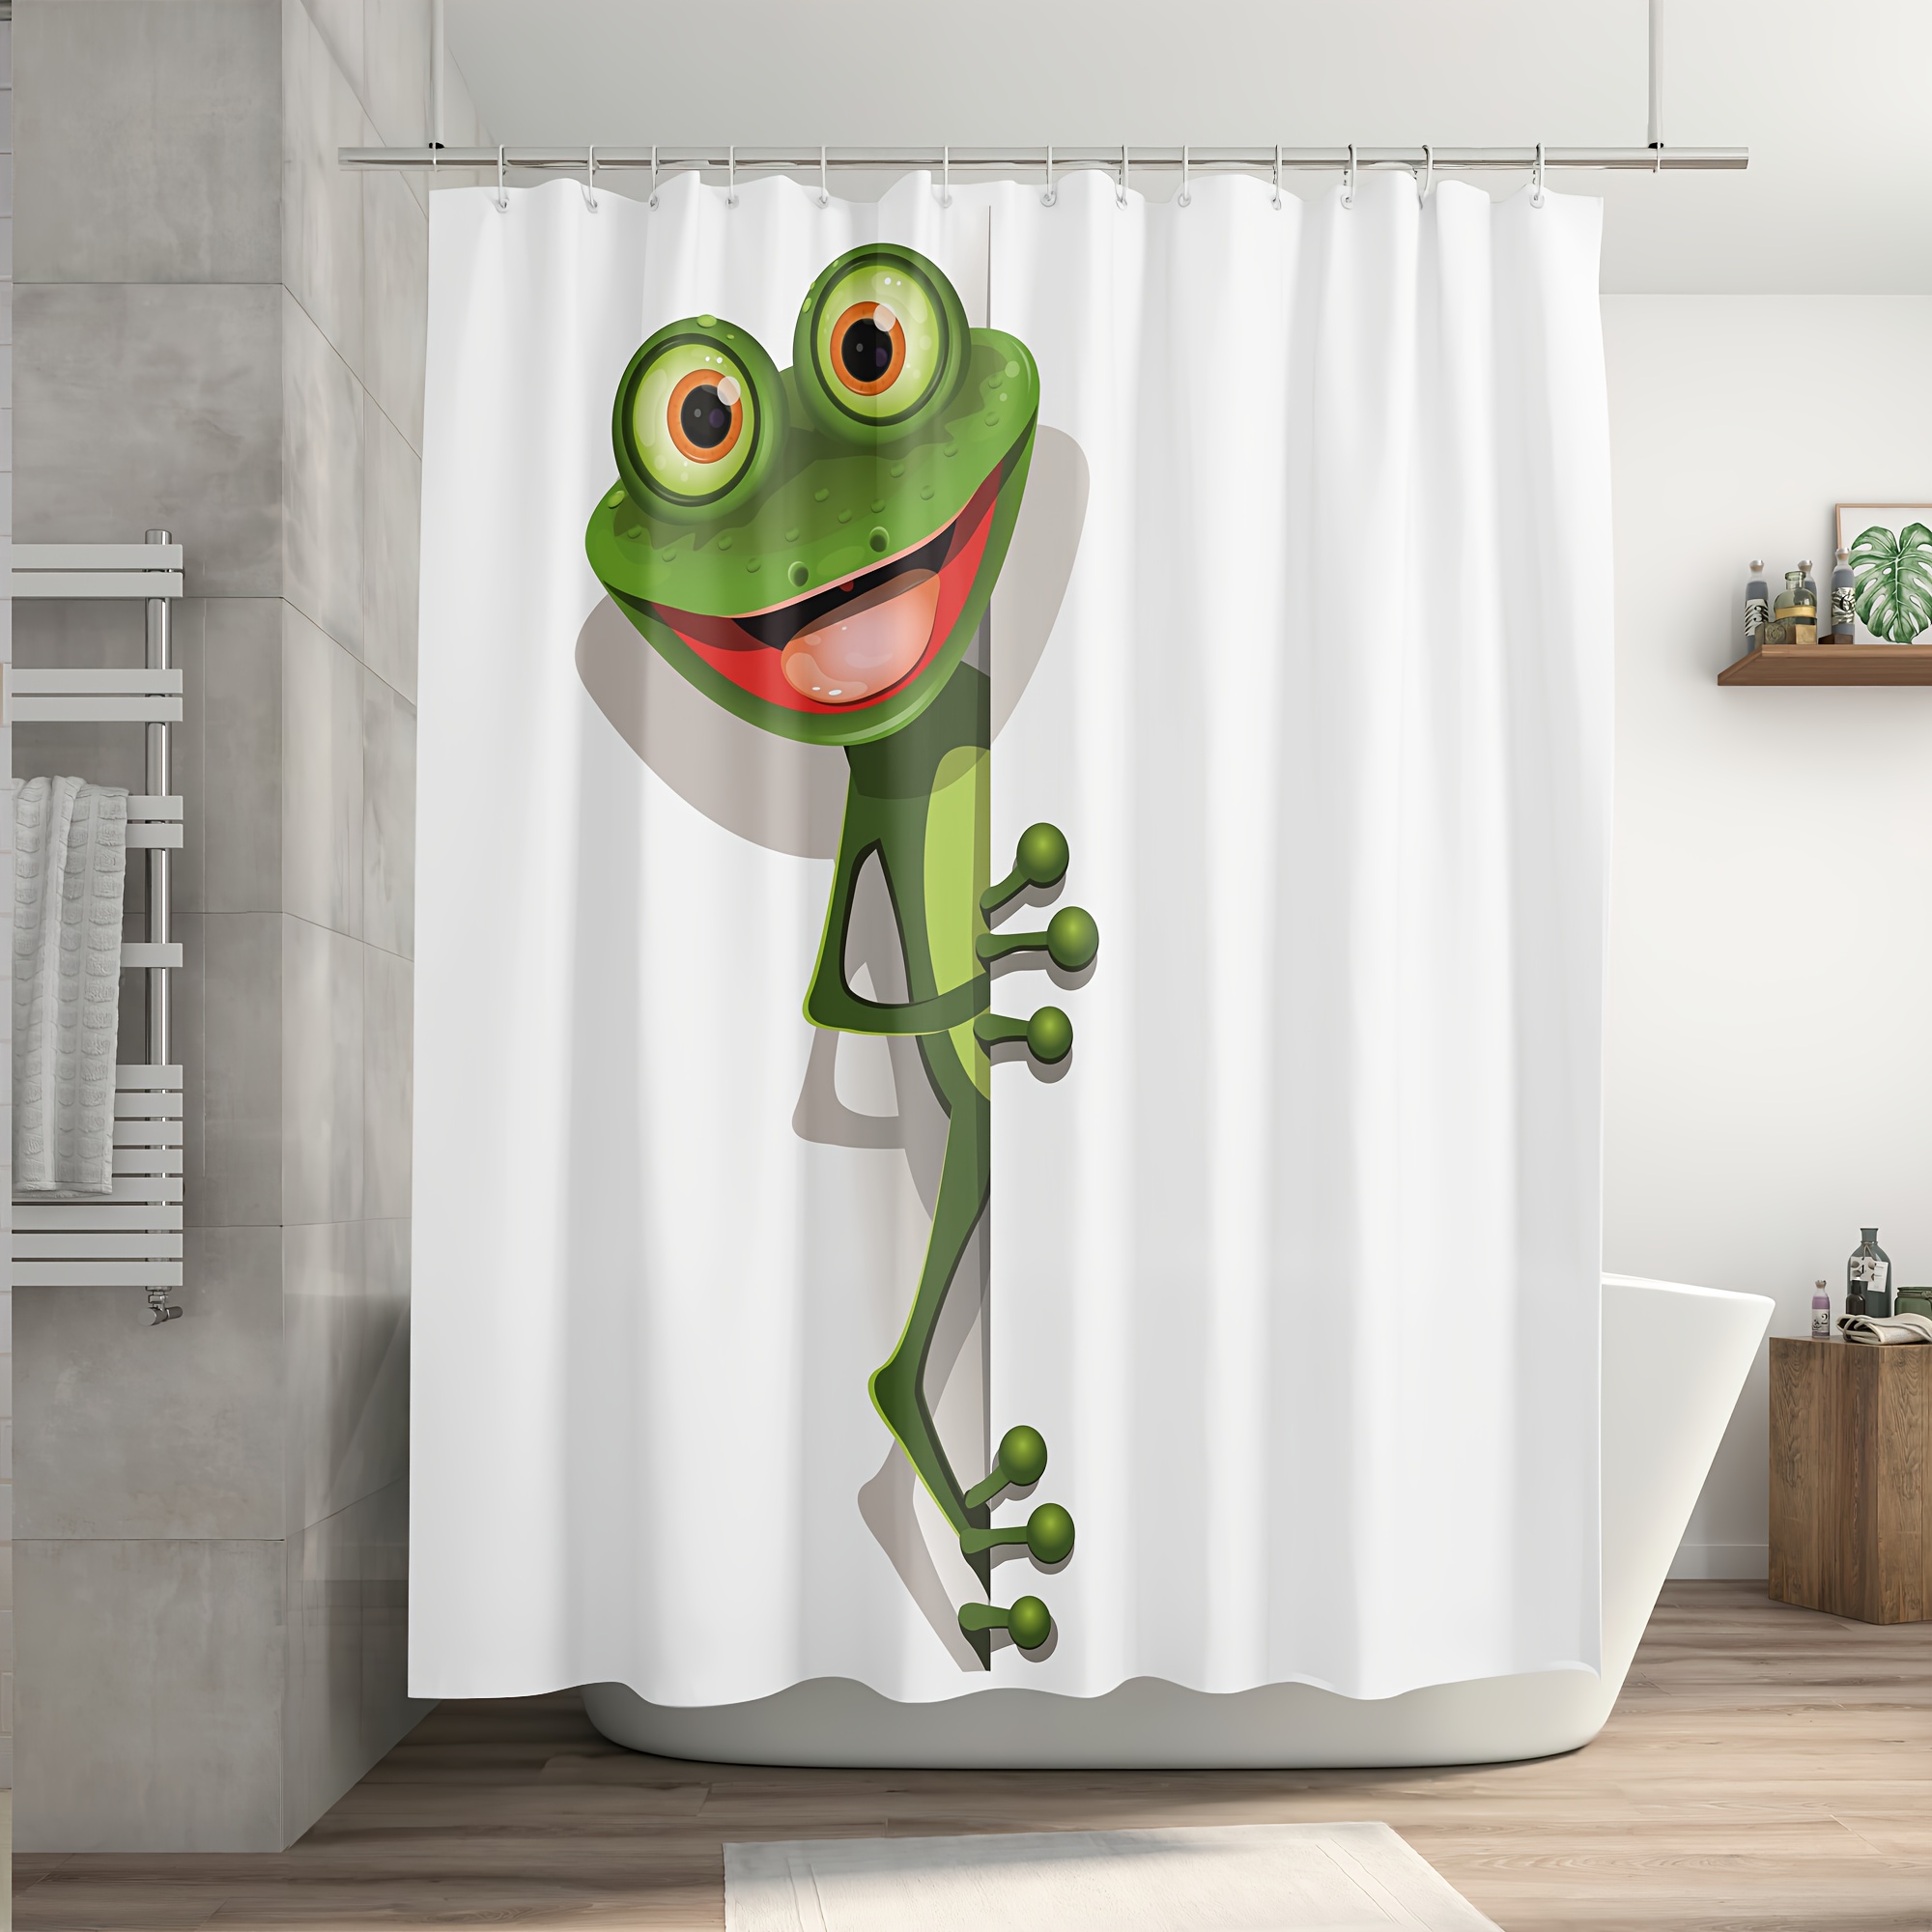 Green Frog Shower Curtain Set with Non-Slip Rugs and Toilet Lid Cover Cute  Animal Theme Kids Fabric Shower Curtain Bathroom Decor with Hooks  Waterproof Washable 72 x 72